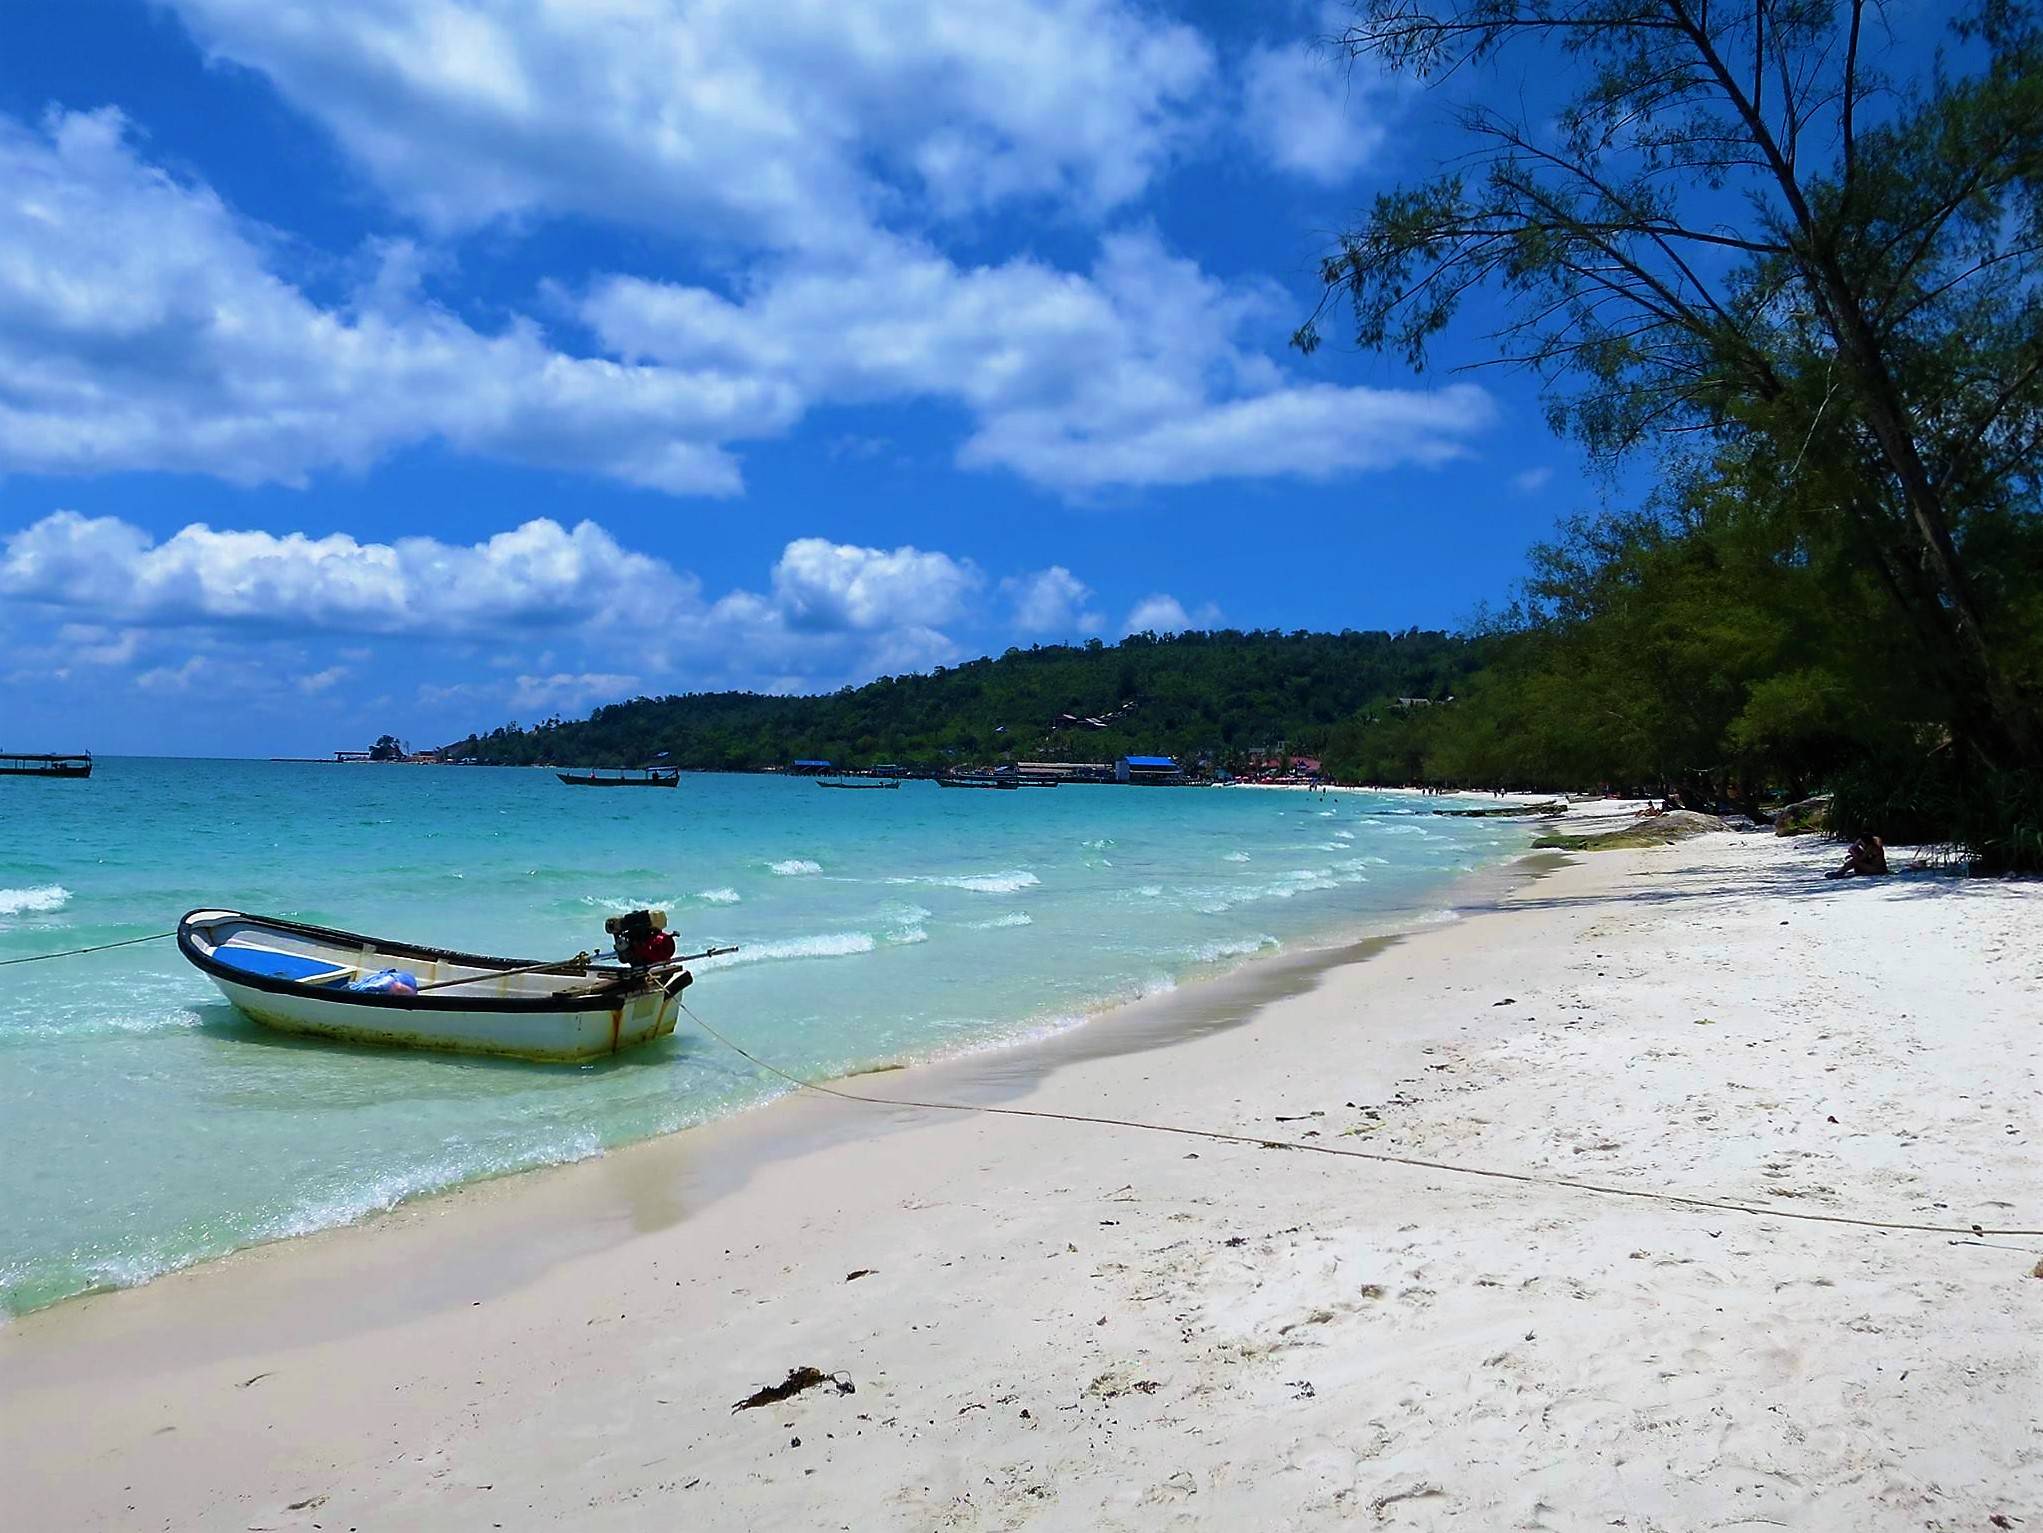 Visit koh rong: koh rong island cambodia - official site